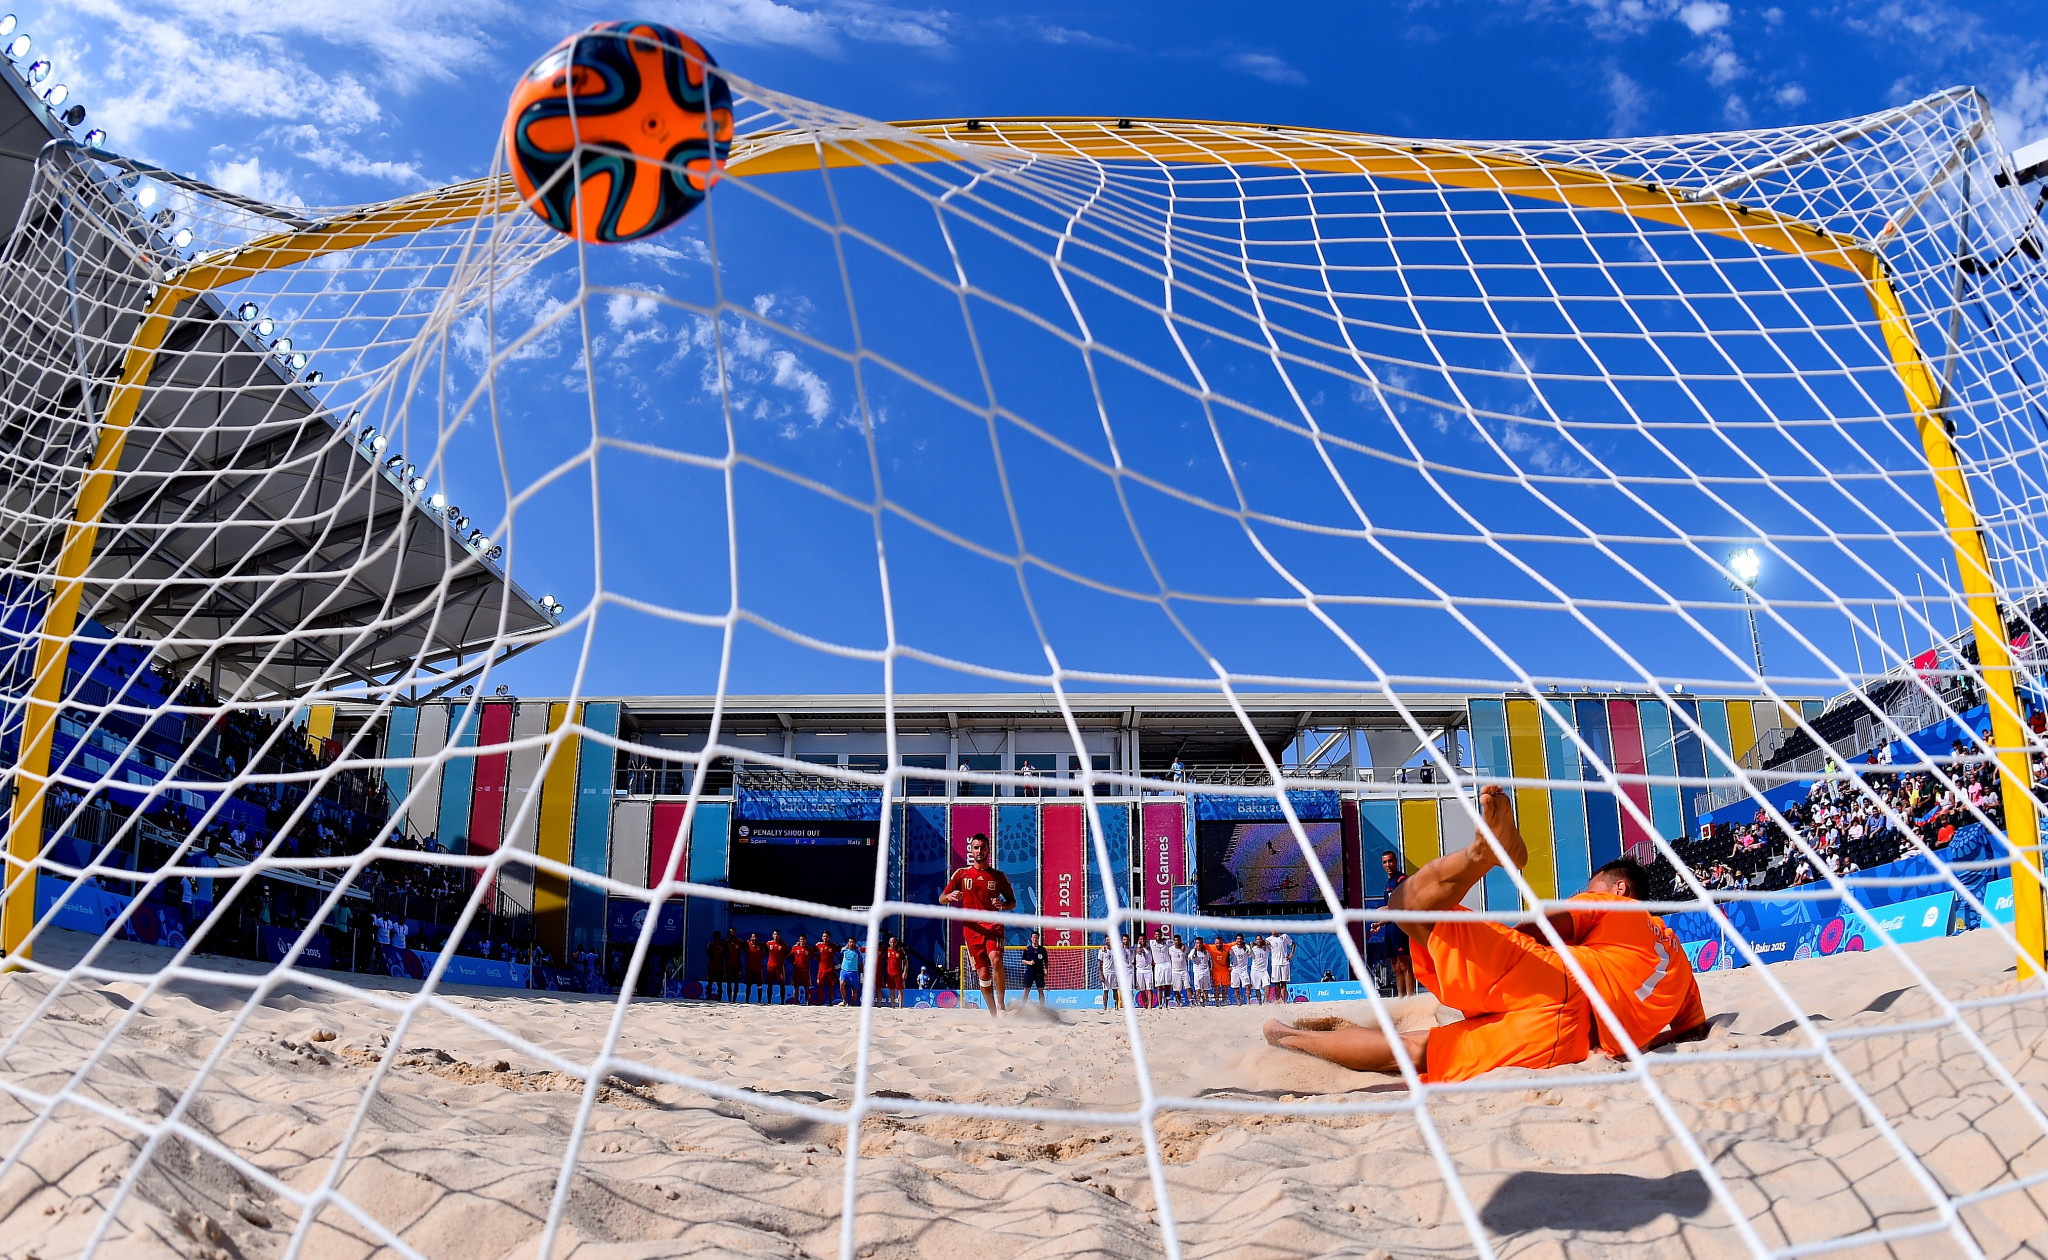 England and Spain top beach soccer qualifying for 2023 ANOC World Beach Games